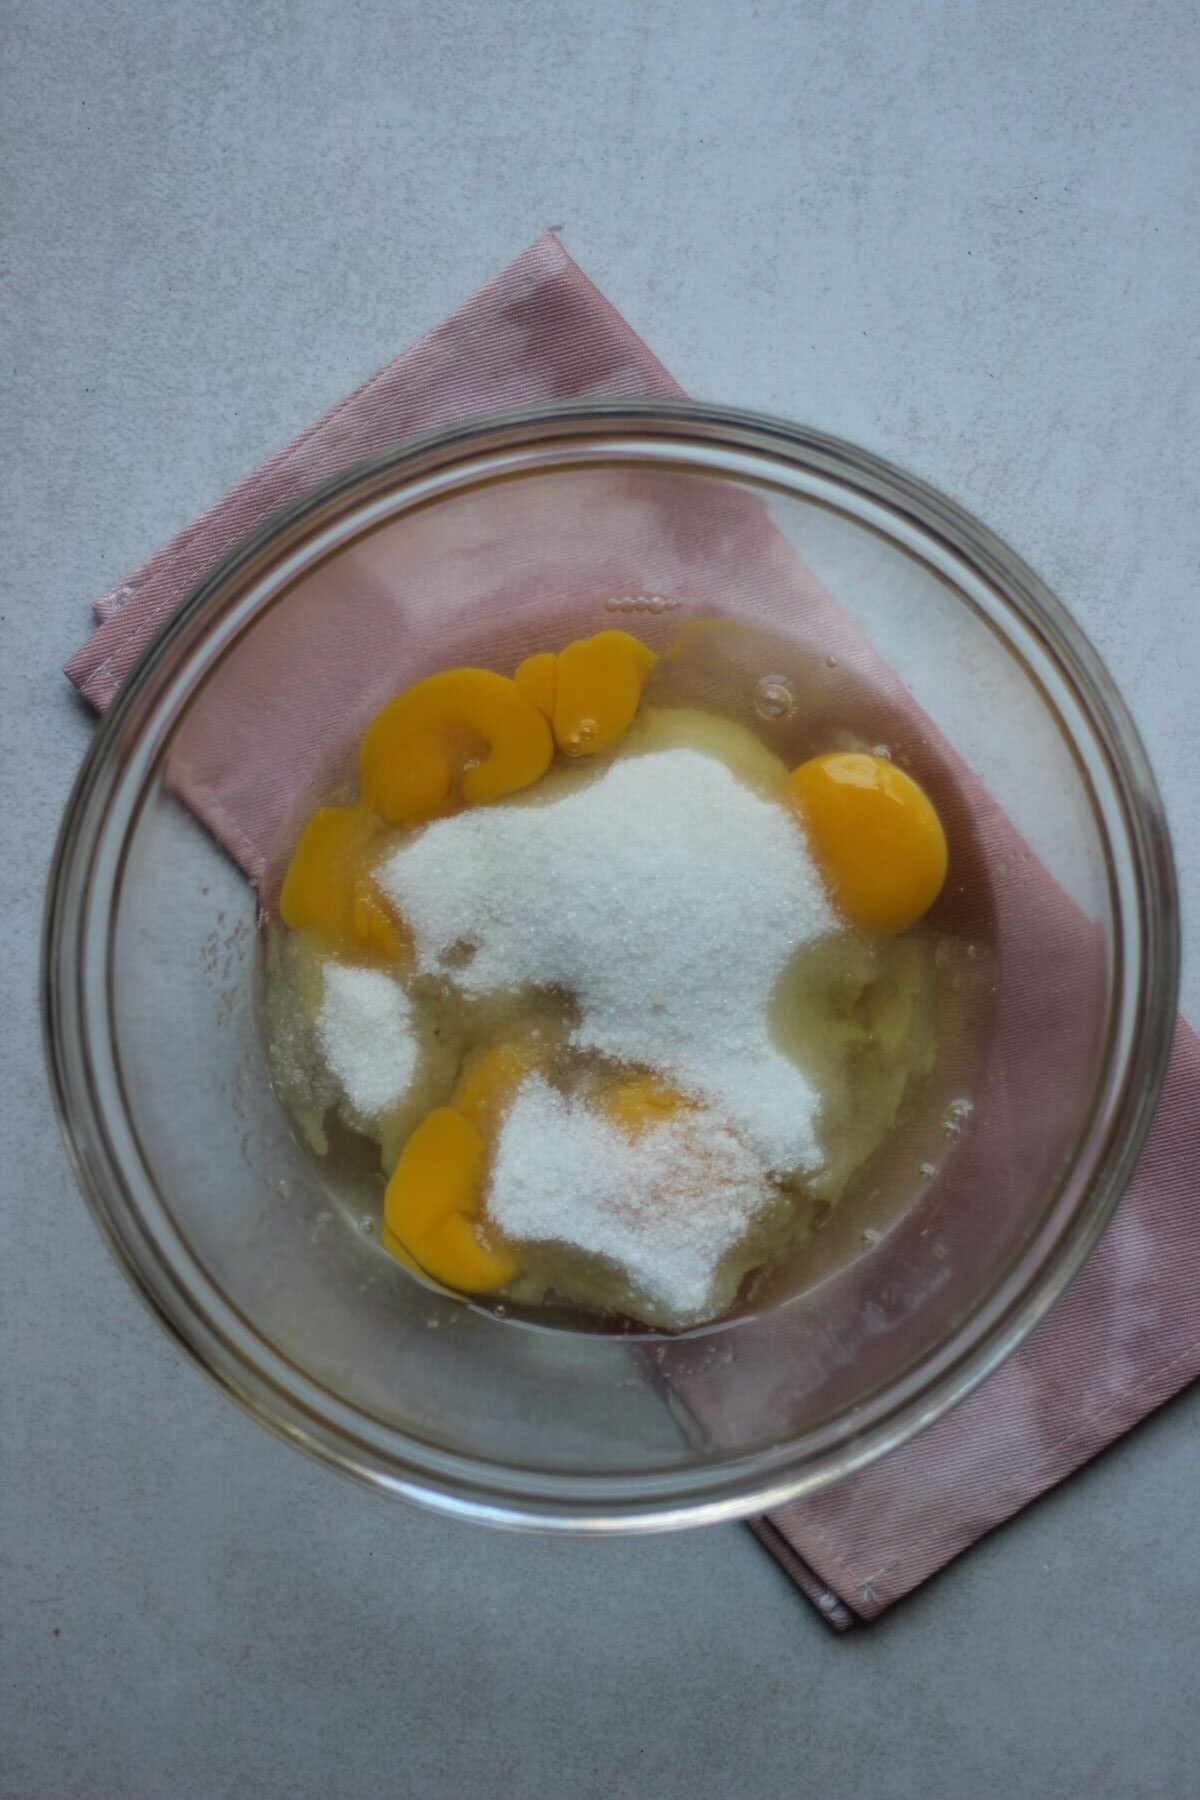 Glass bowl with egg and white yolks, and sugar. Pink napkin under the bowl.